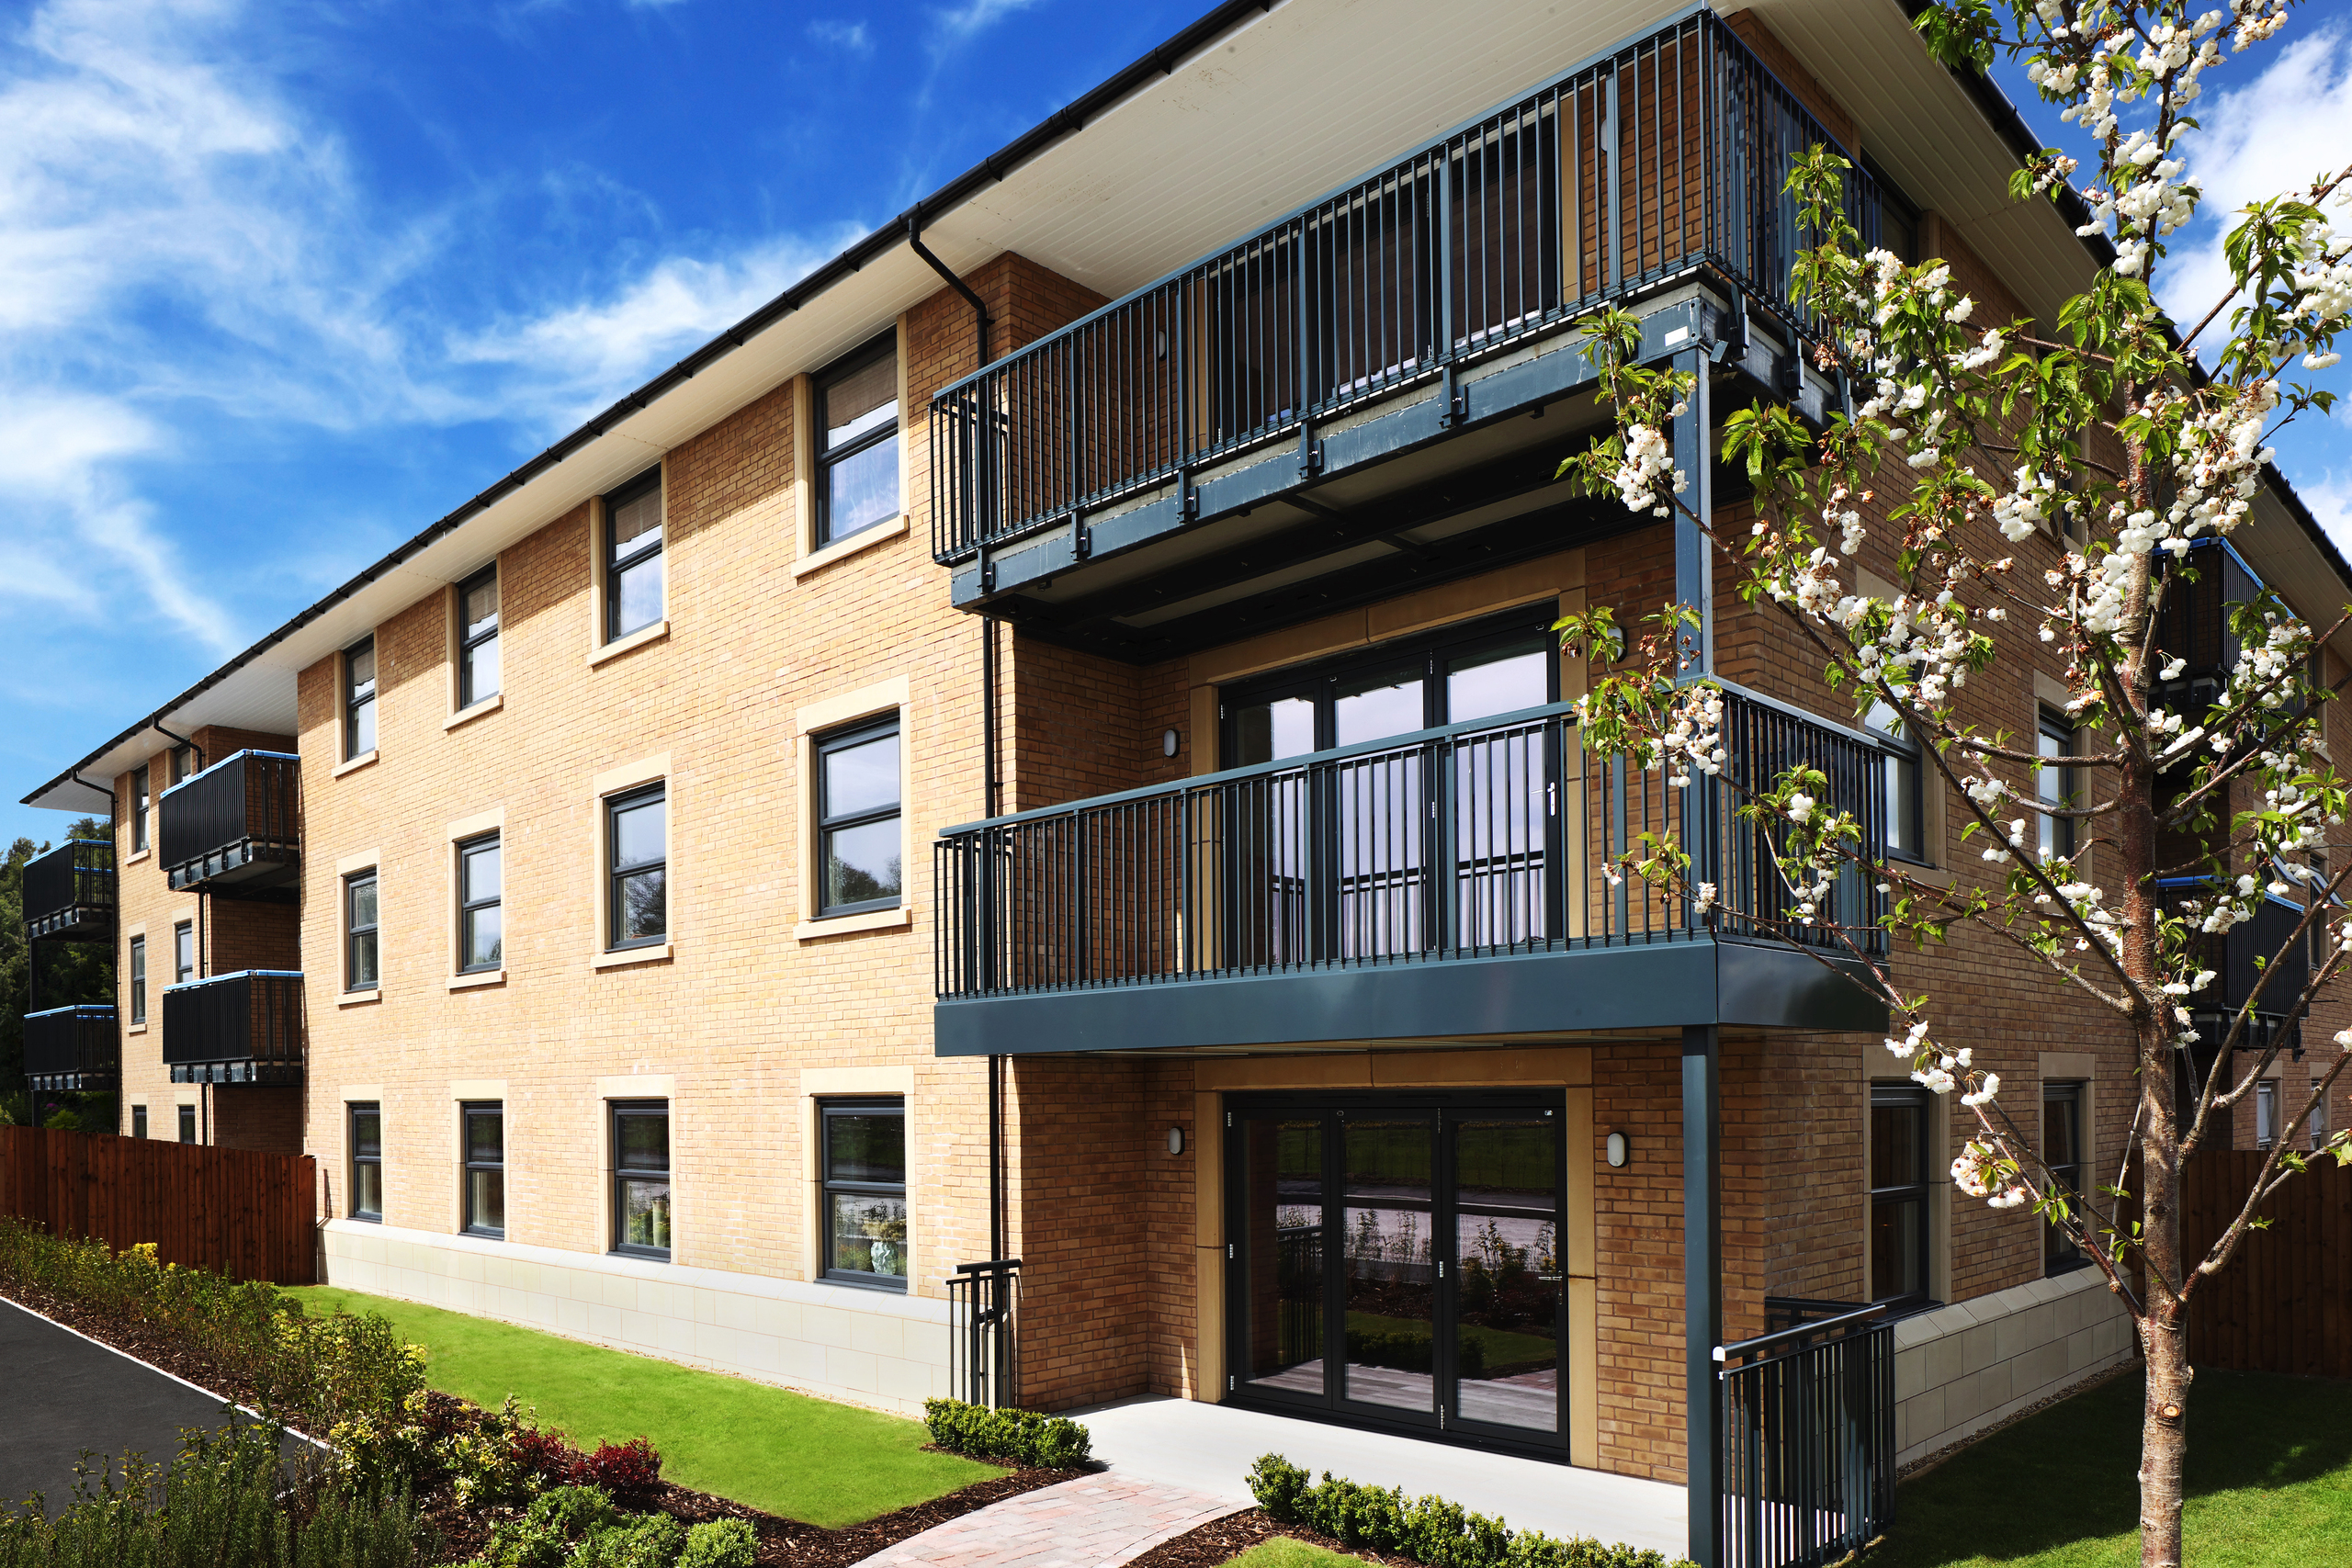 The Courtyard at Woodford Garden Village in Greater Manchester